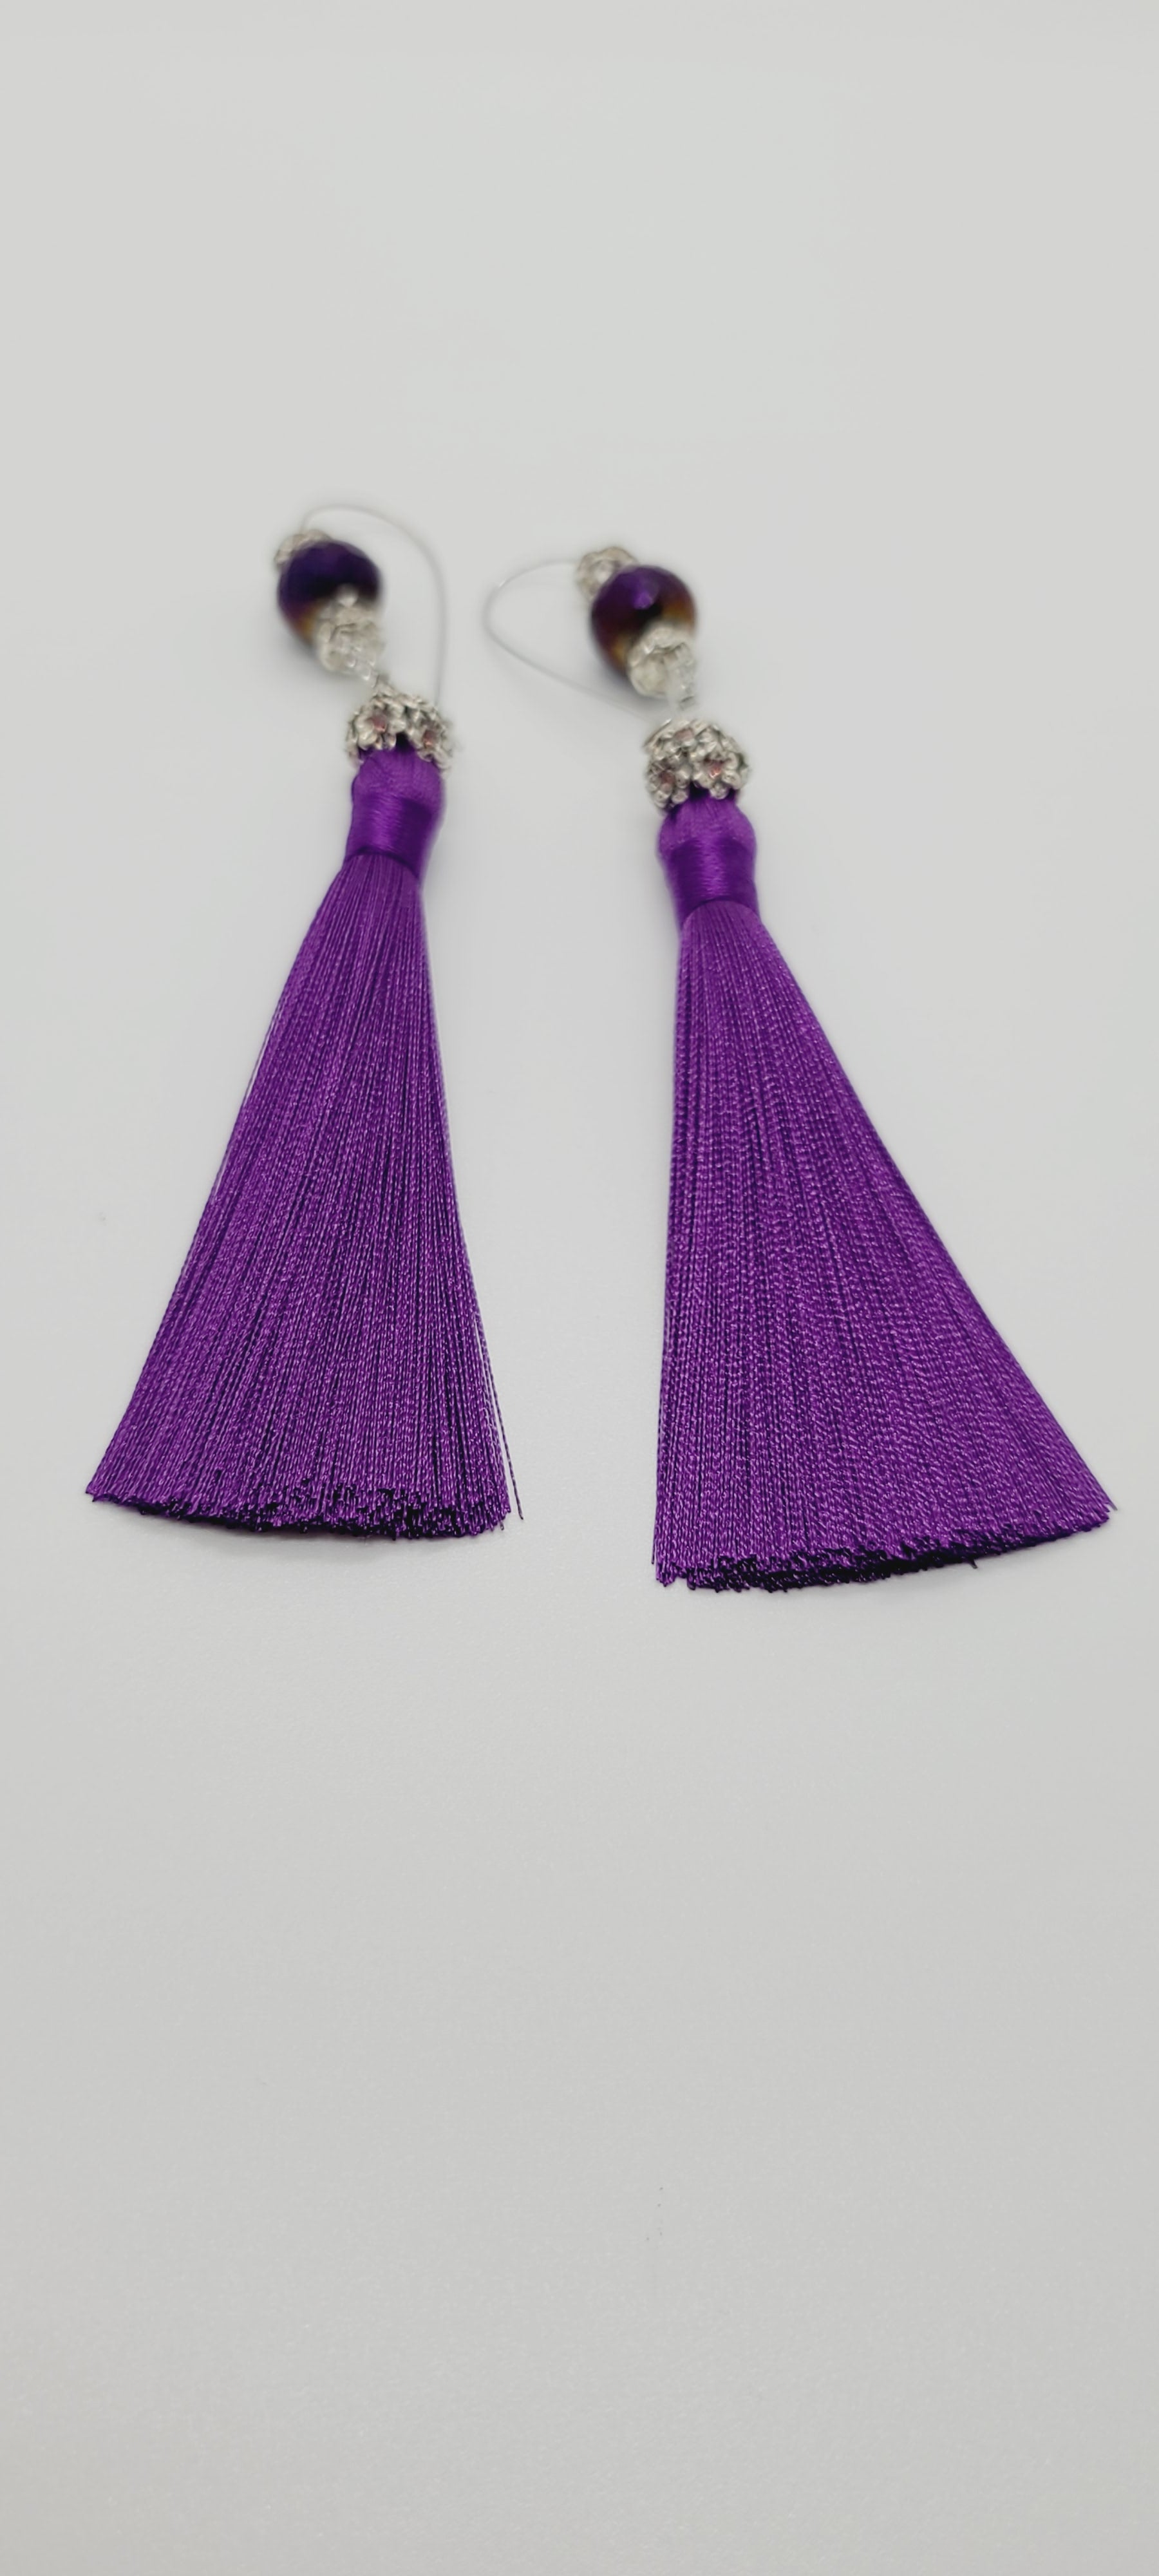 Length: 5 inches | Weight: 0.5 ounces  Distinctly You! These earrings are made with purple tassels, 10mm purple faceted glass stones, accented with silver and purple rondelles.